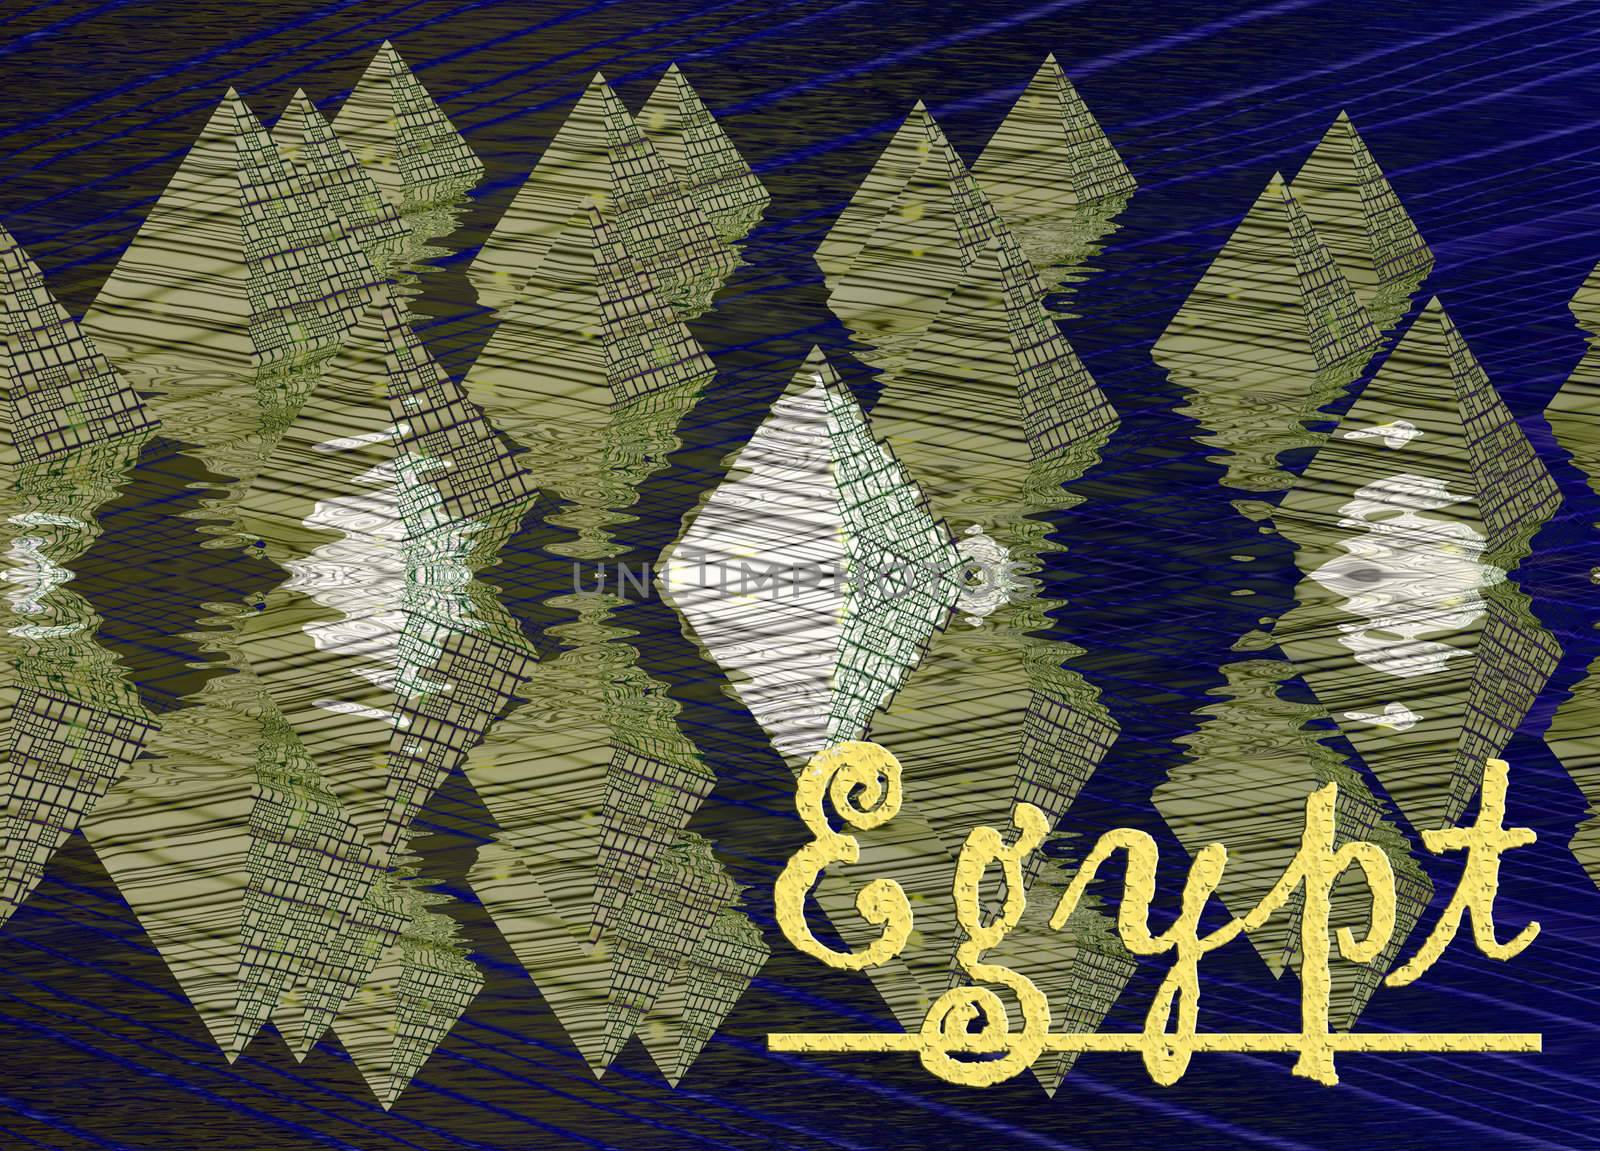 Yellow Pyramids and Reflections in Water with Egypt Text Illustr by bobbigmac